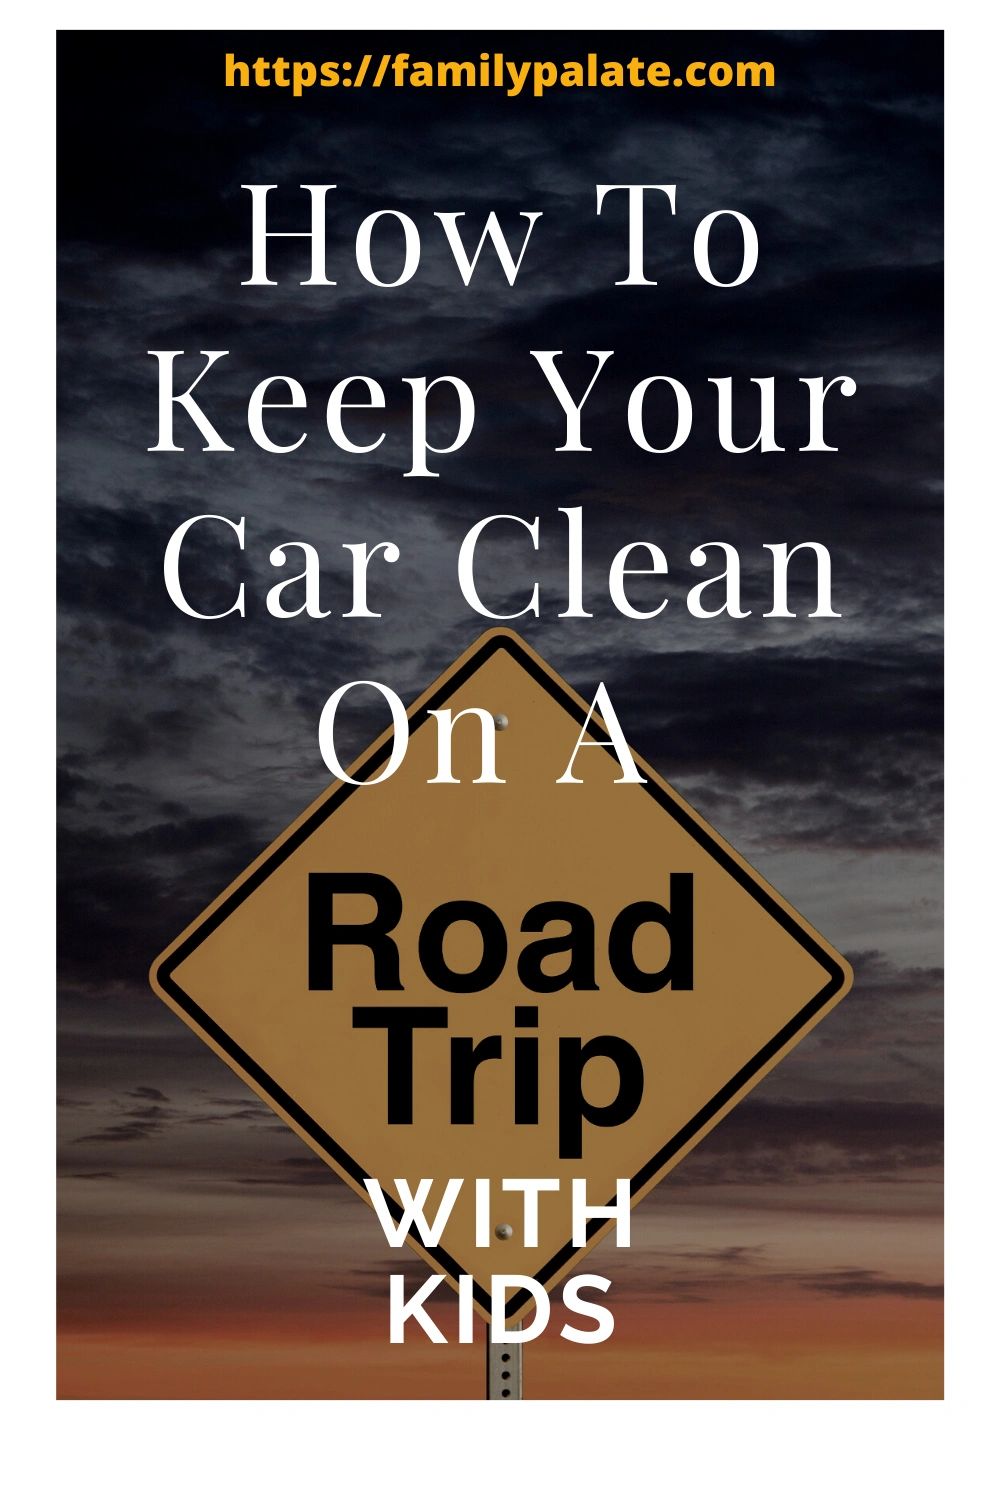 4 Ways to keep your car clean when you have kids